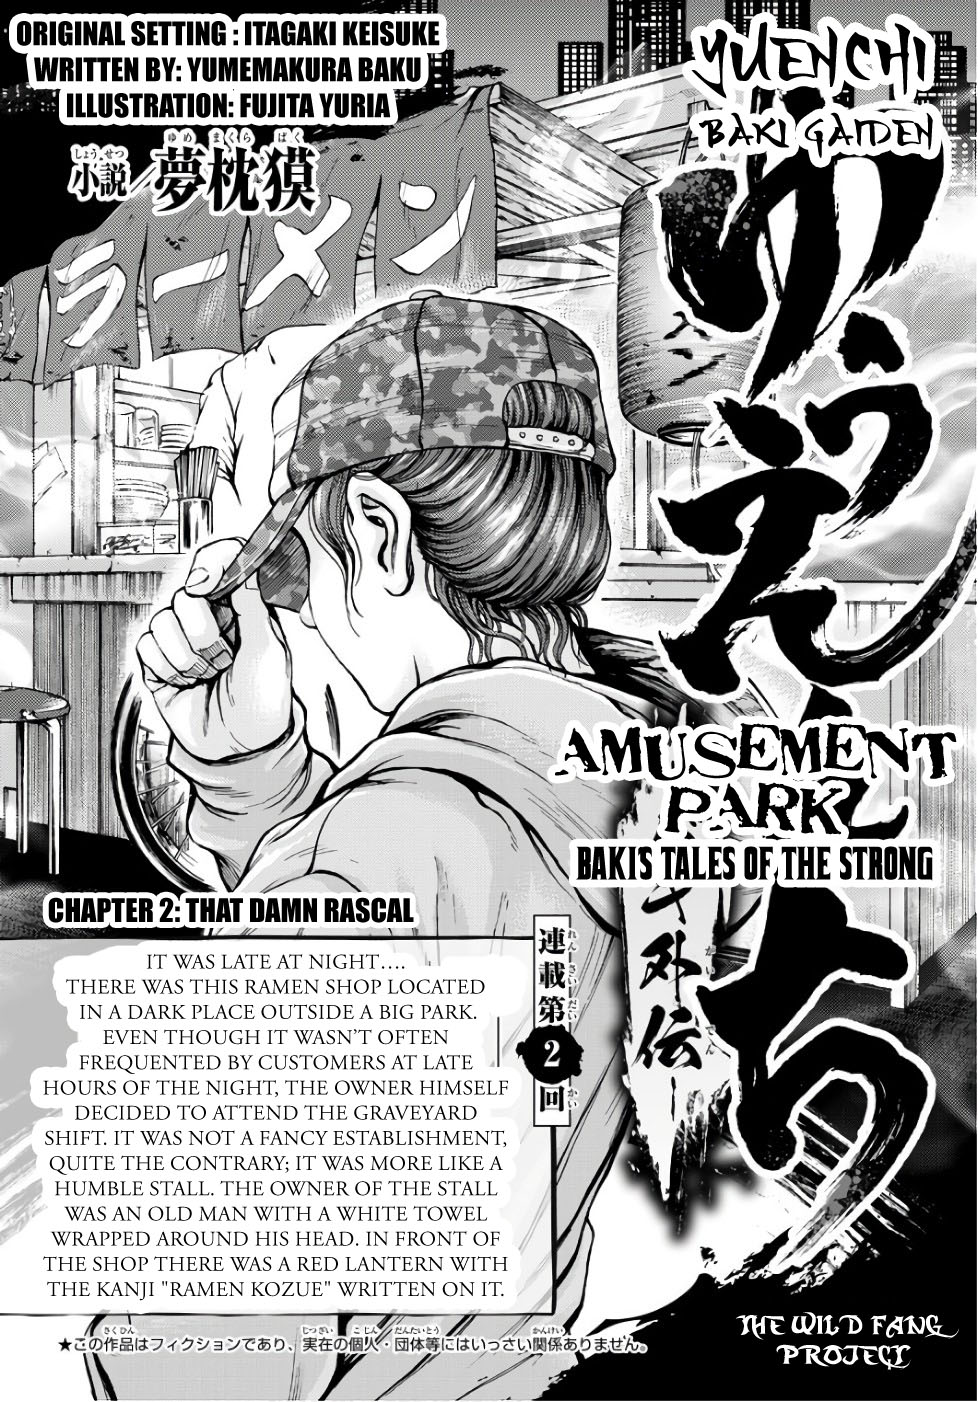 Amusement Park: Baki's Tales Of The Strong Chapter 2 #1